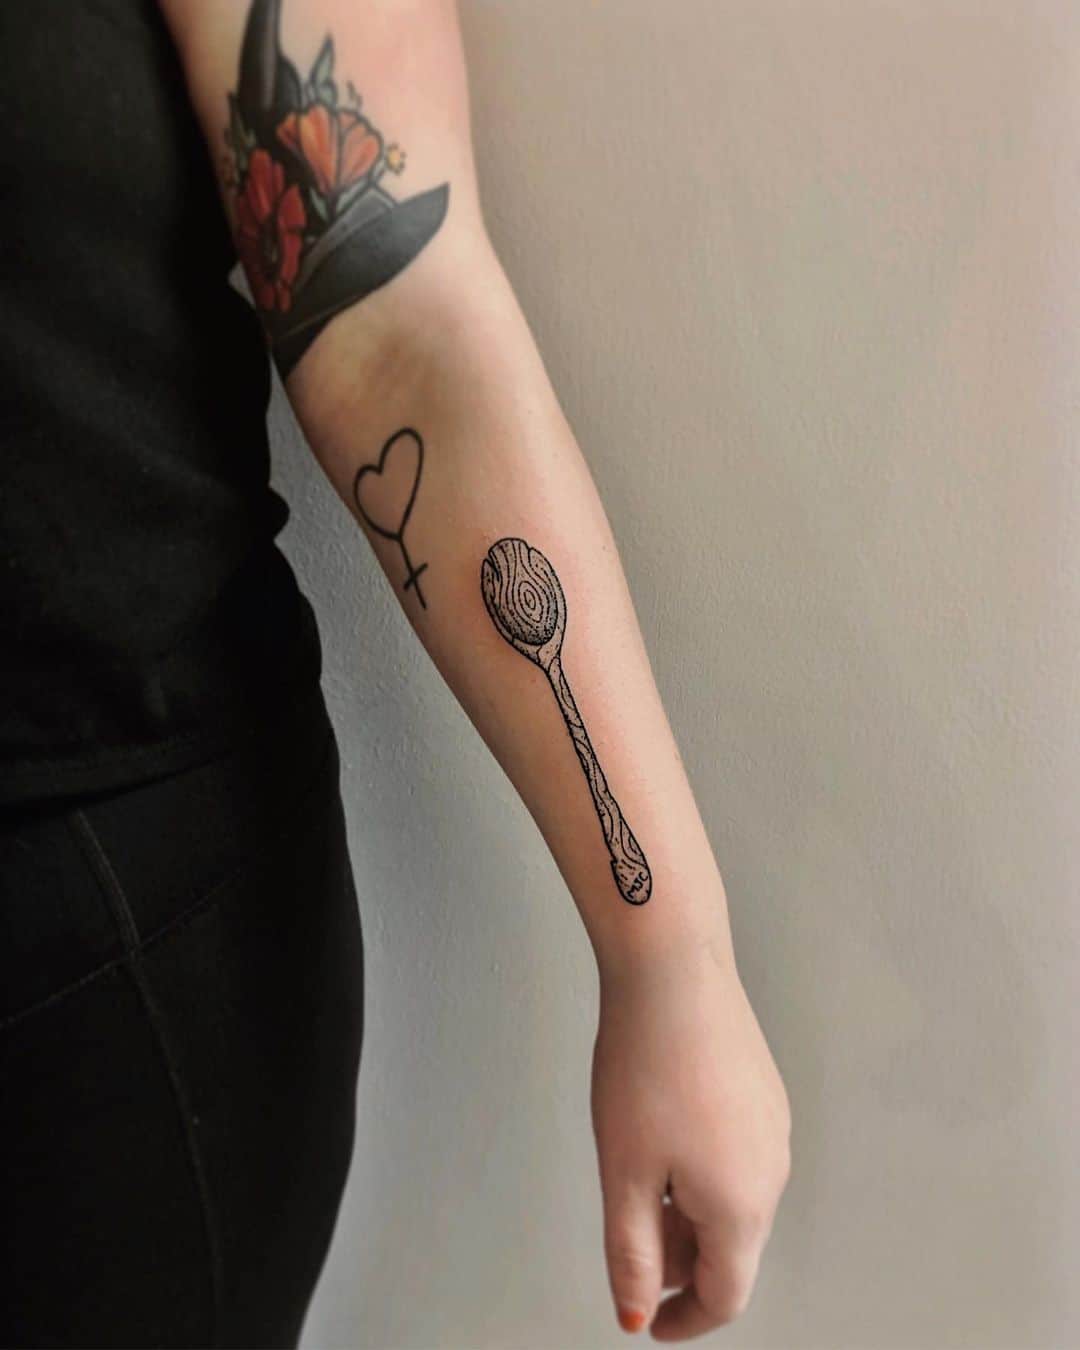 50+ Stick and Poke Tattoo Design Concepts | Wooden Spoon